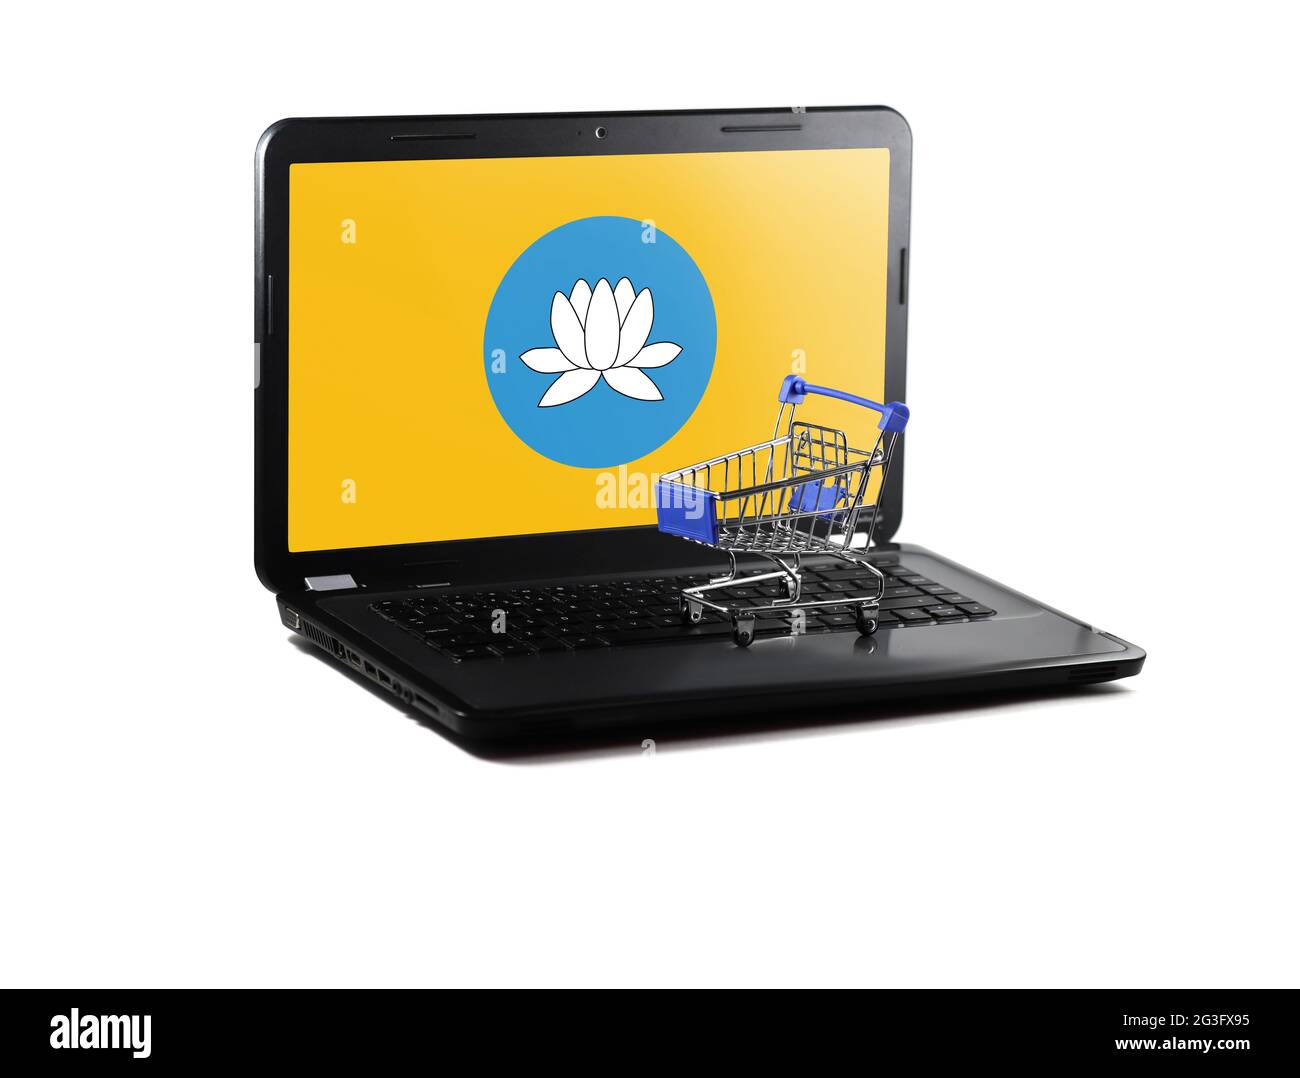 Isolated on white background laptop with Kalmykia flag on display, online shopping sale concept Stock Photo